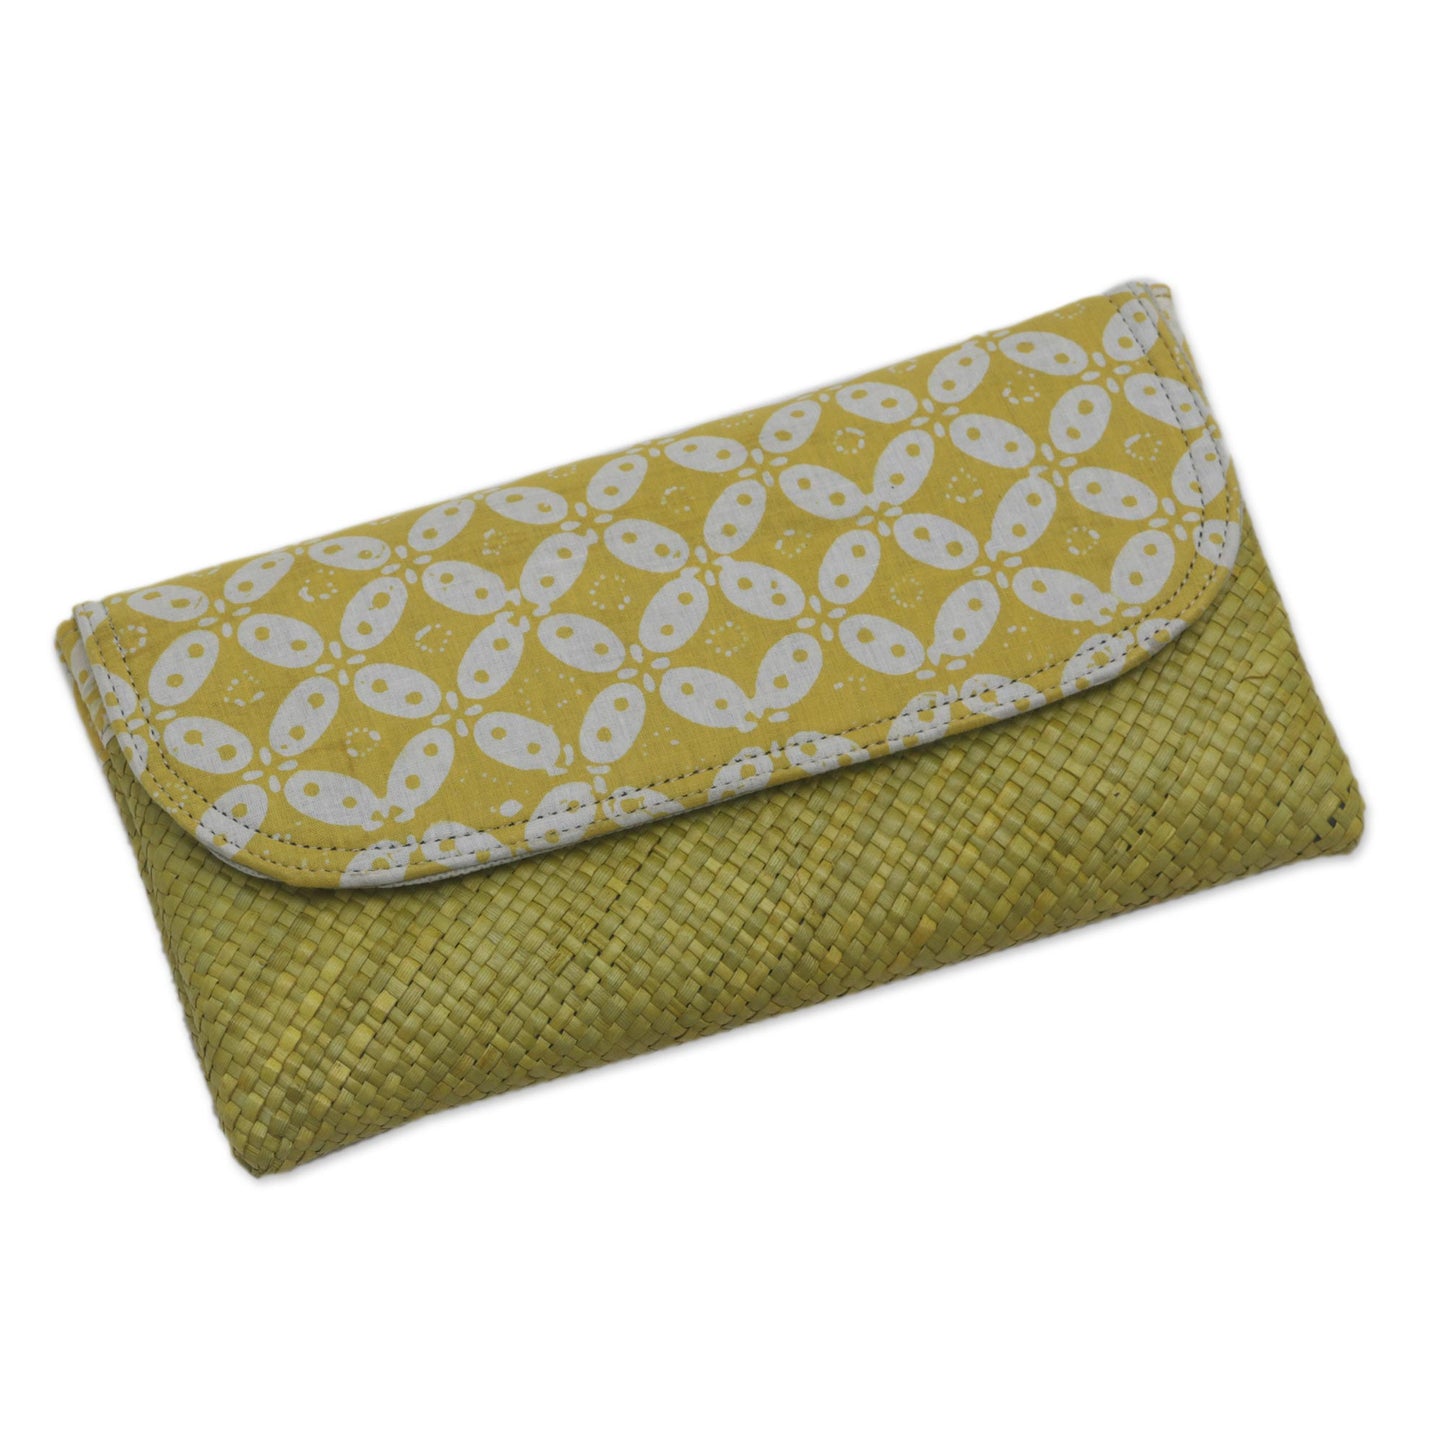 Truntum Dreams Hand Woven Lontar Leaf and Cotton Yellow Clutch Bag